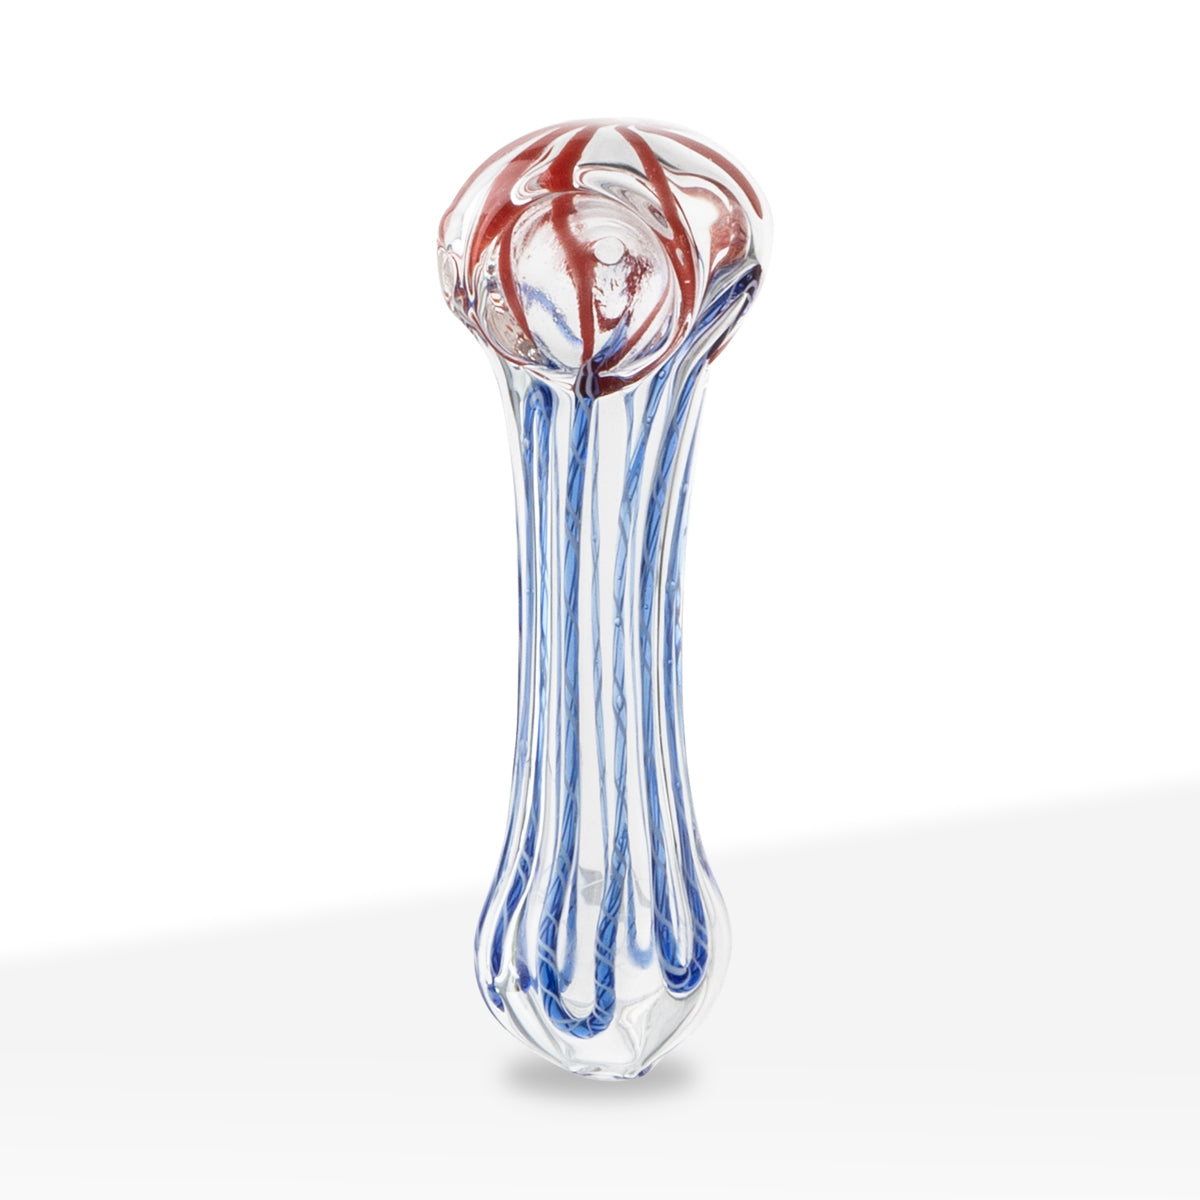 Hand Pipe | Classic Glass Spoon Candy Cane Color Swirl Hand Pipes | 5" - Glass - Assorted Colors Glass Hand Pipe Biohazard Inc